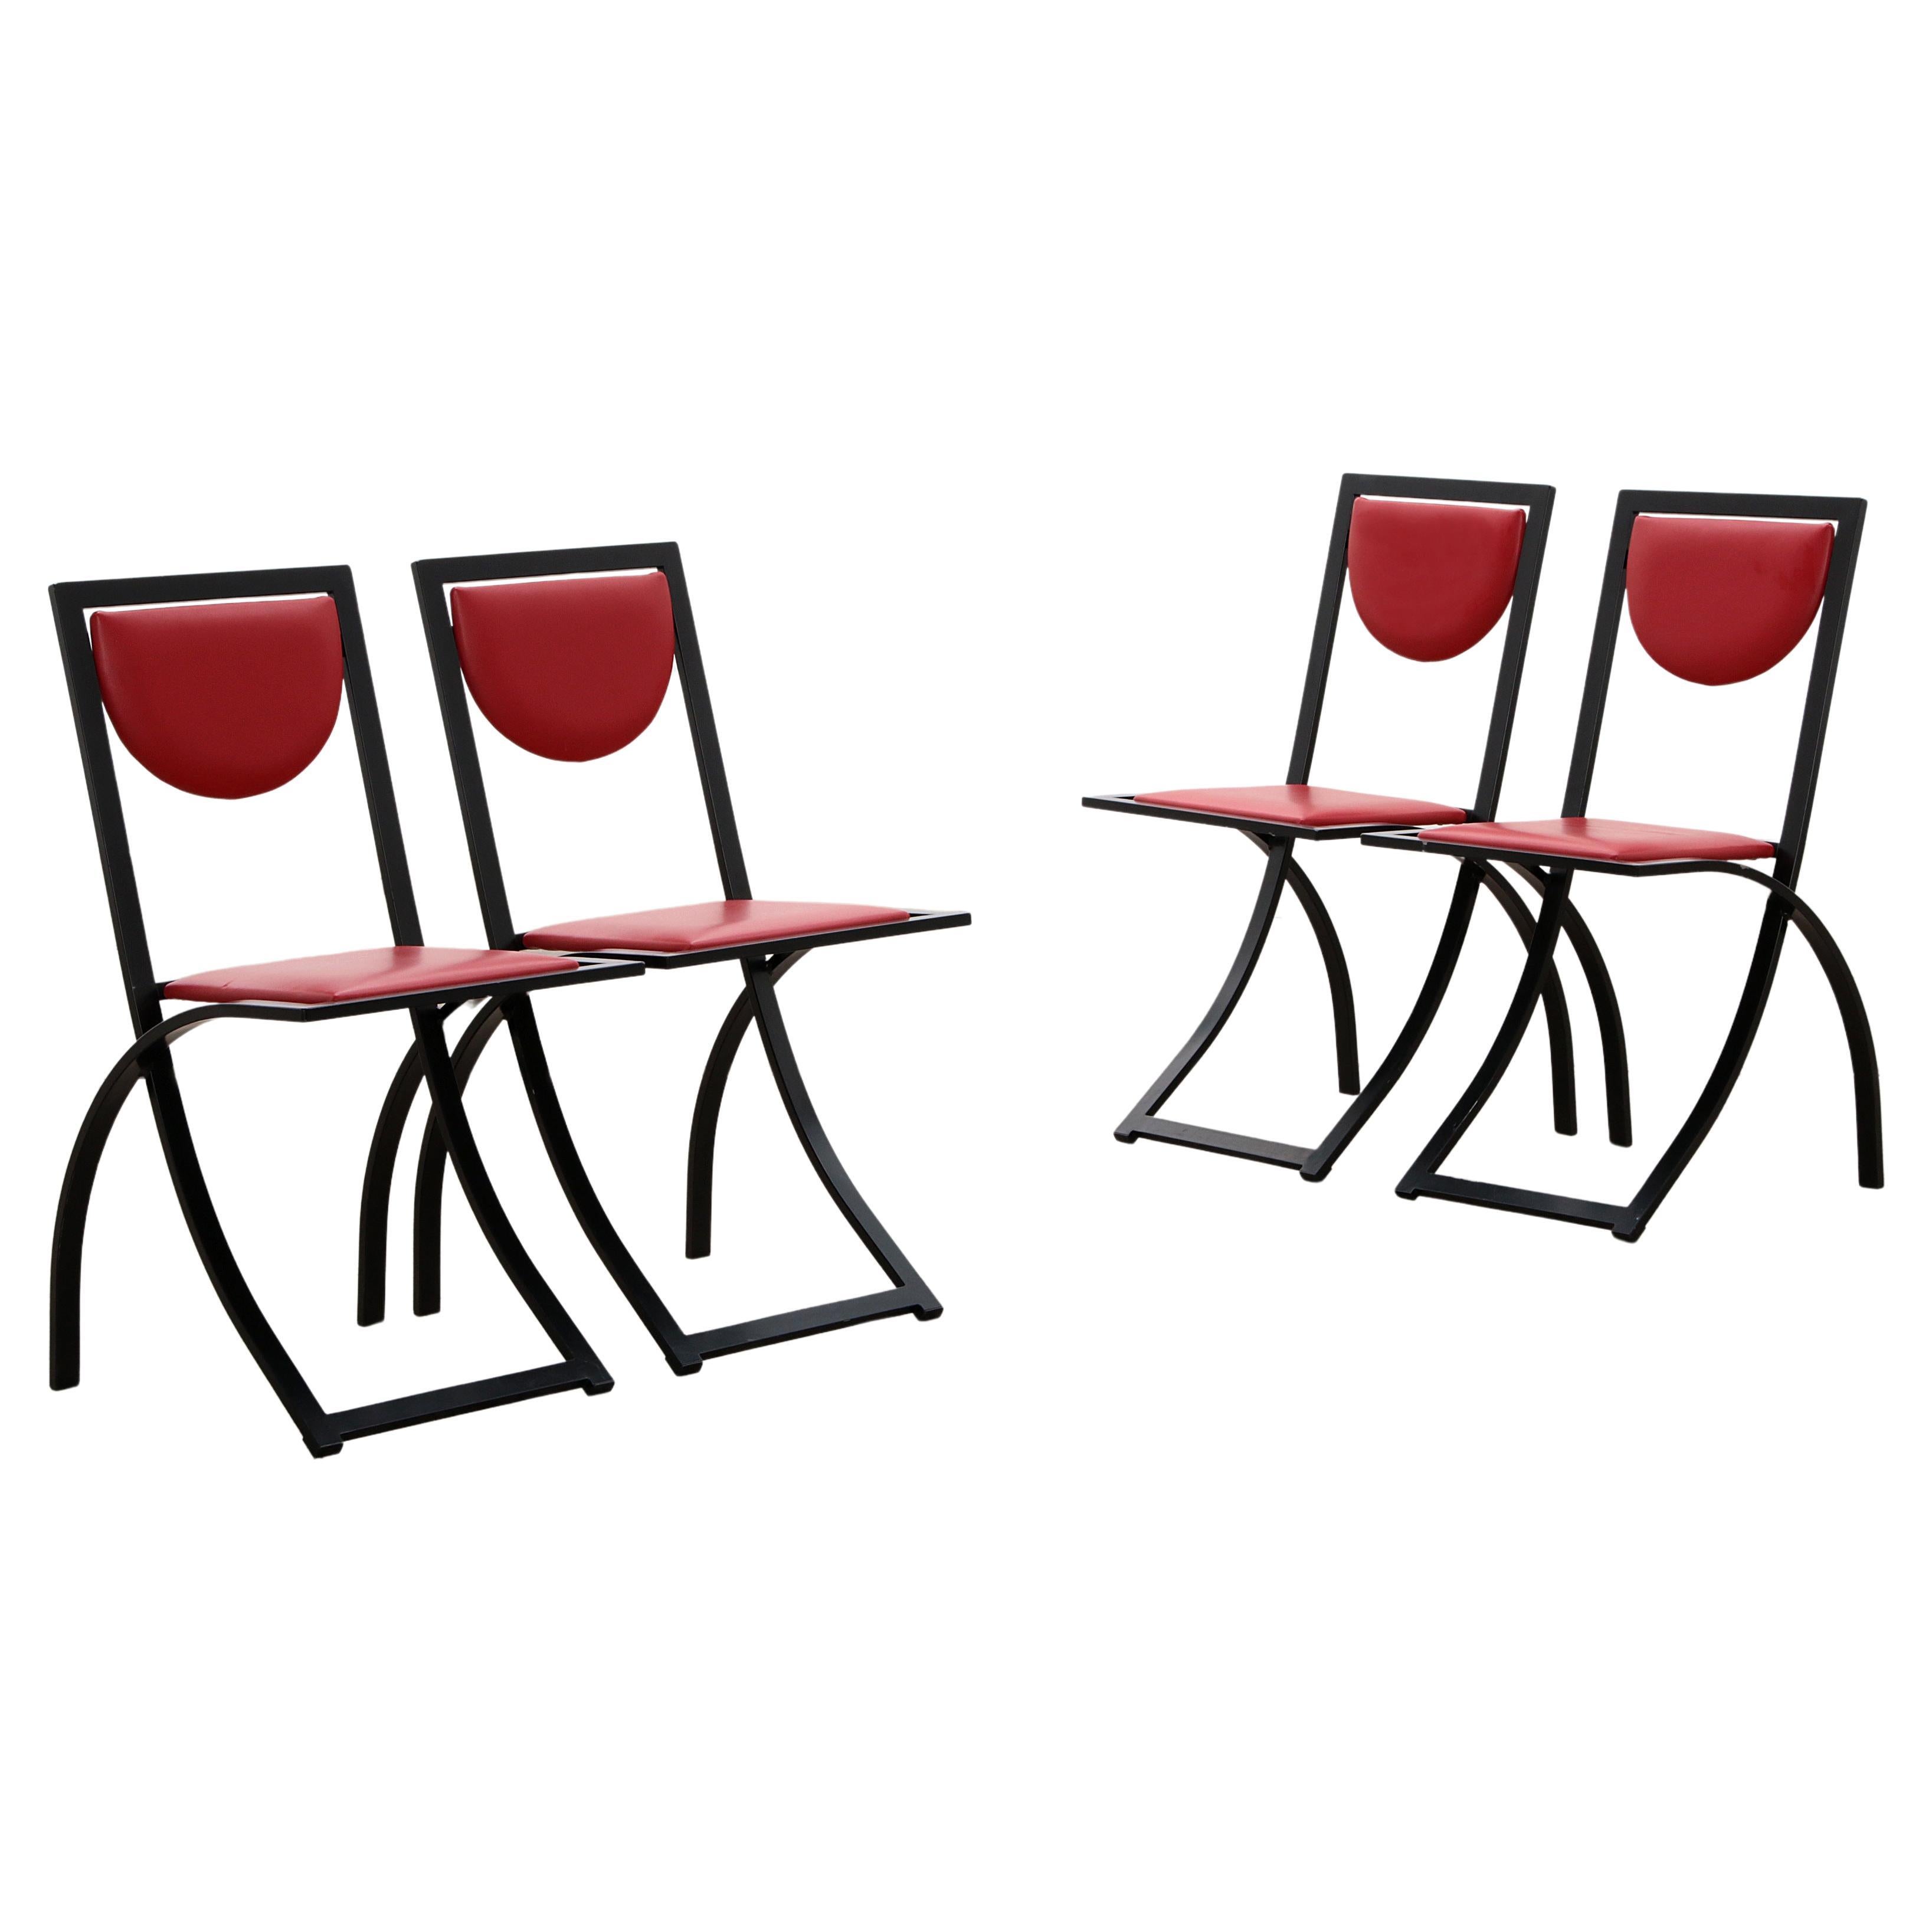 Vintage Sine Chairs by Karl Friedrich Förster - Set of 4 For Sale